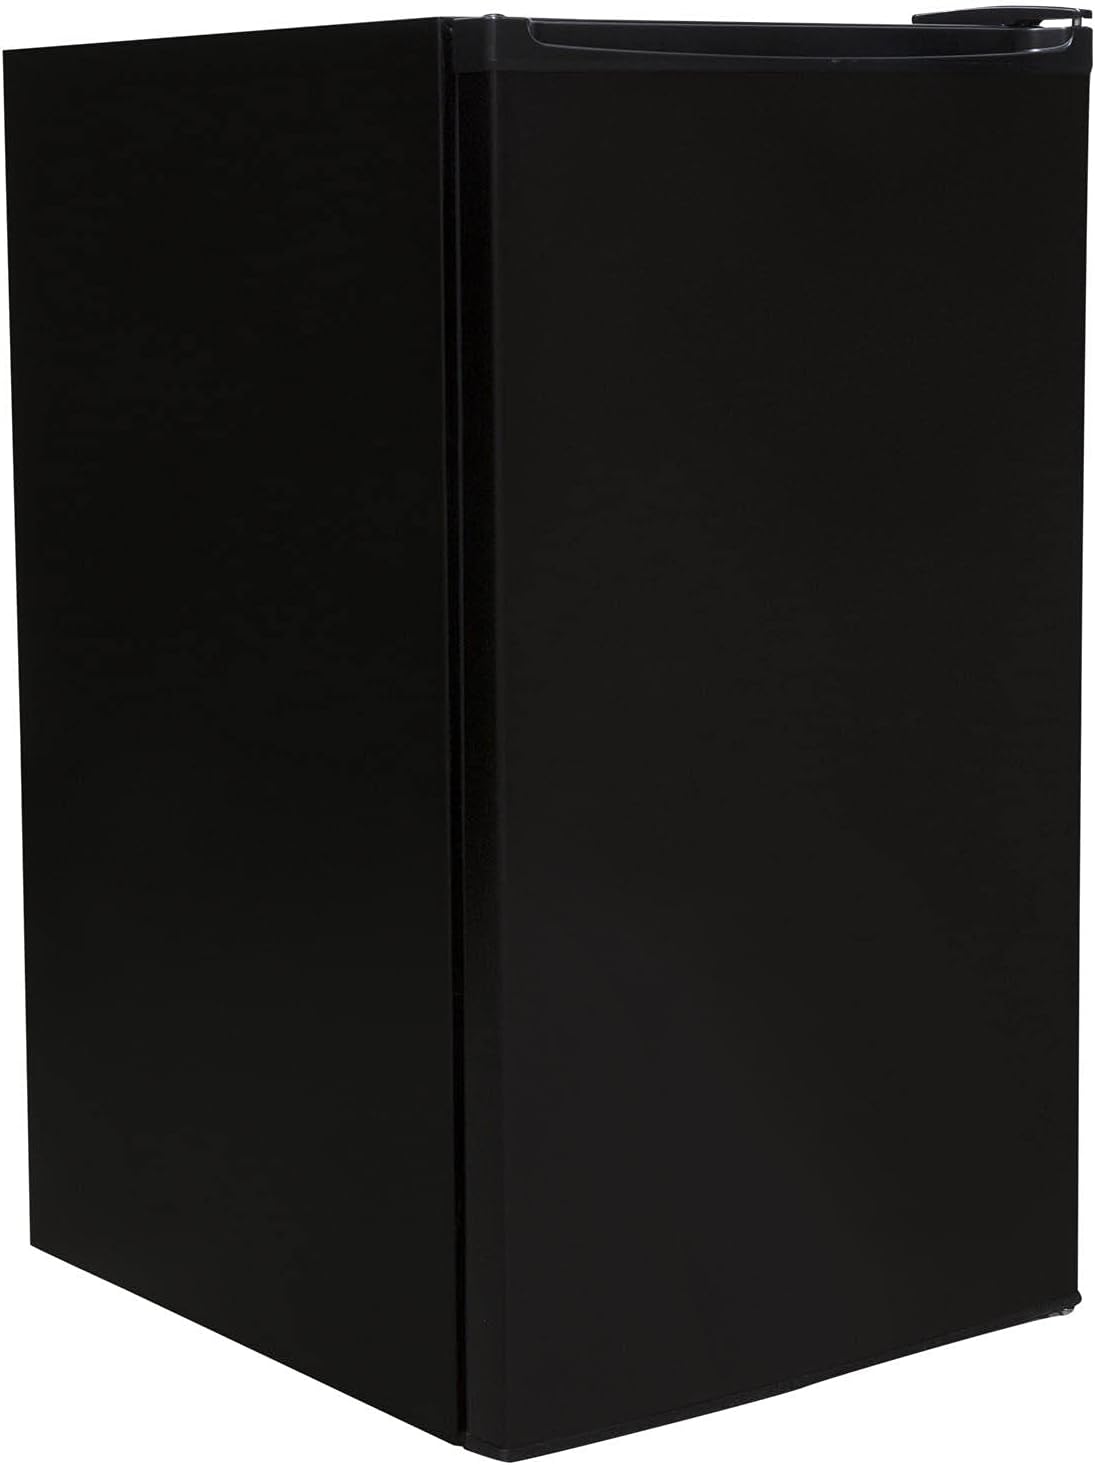 SIA LFIBL 48cm Black Free Standing Under Counter Fridge With 3* Ice Box - Amazing Gadgets Outlet